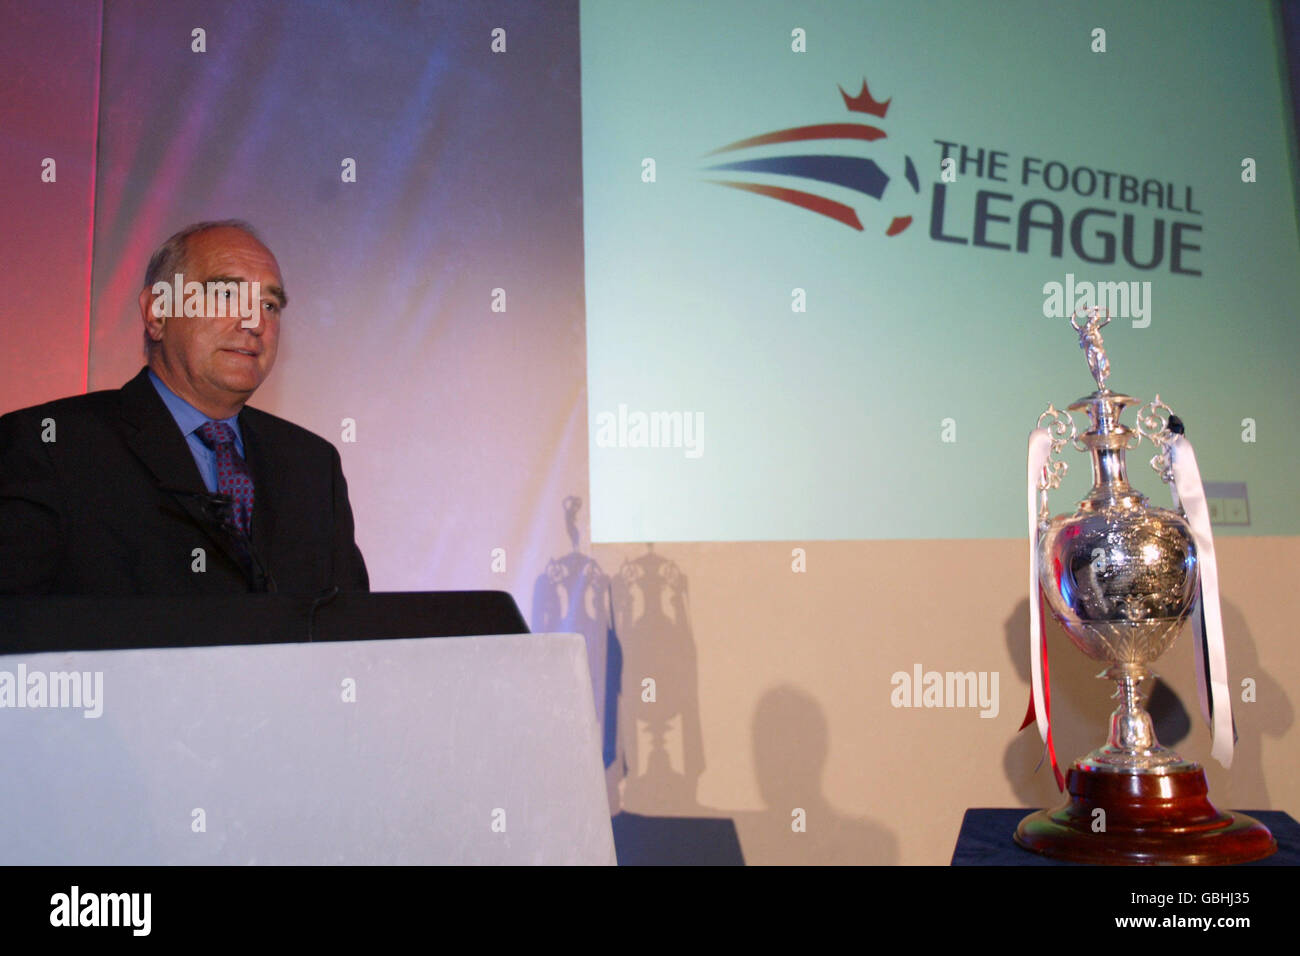 Chairman of the Football League Sir Brian Mawhinney with the new logo in the background Stock Photo